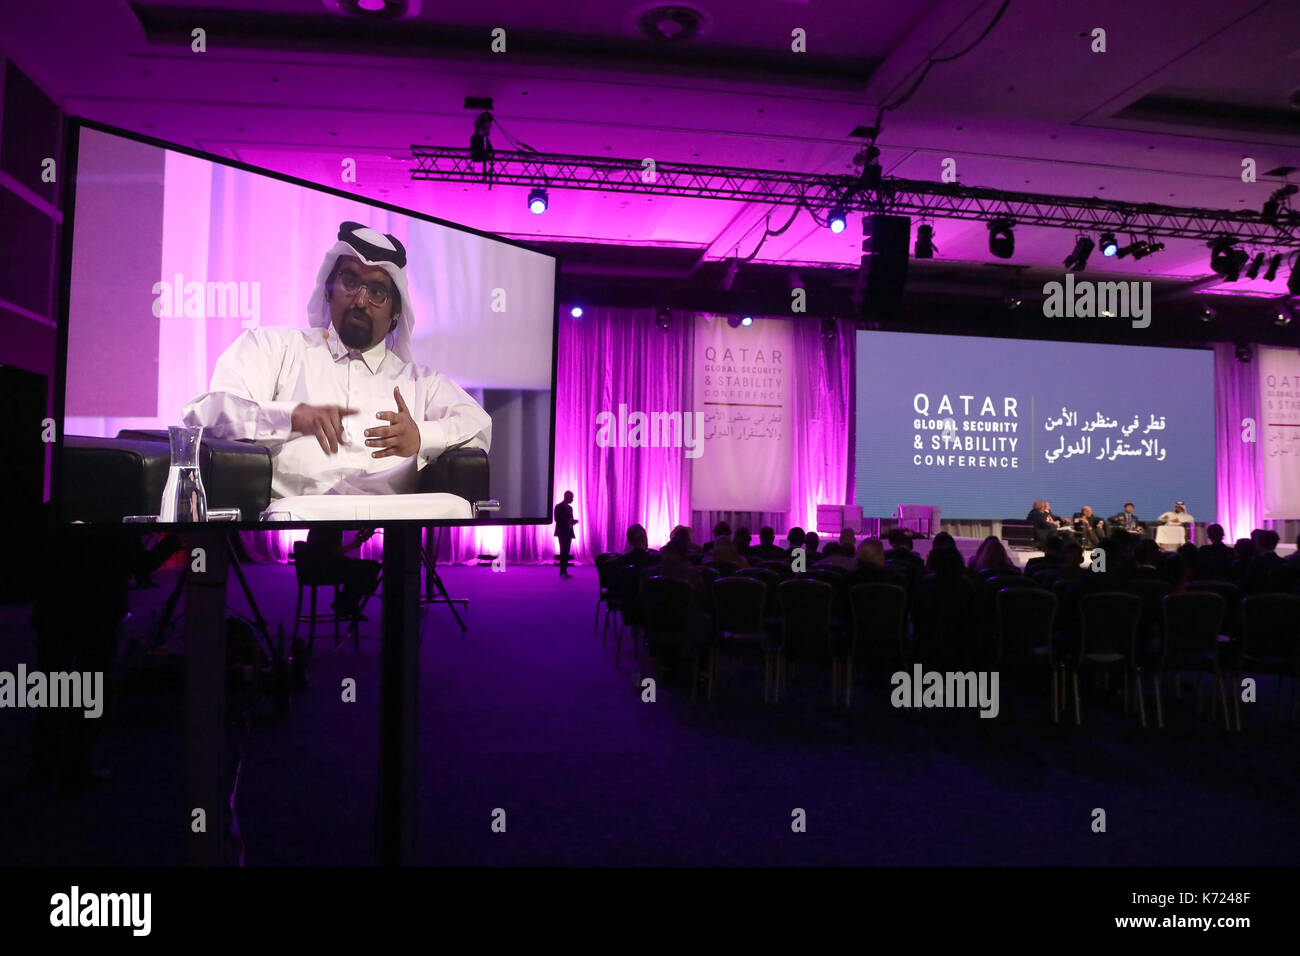 London, UK. 14th Sep, 2017. Khalid al-Hail, president of the Qatar National Democratic Party, an opposition group, speaking during a panel discussion at the Qatar Global Security & Stability Conference in London on 14 September 2017. Credit: Dominic Dudley/Alamy Live News Stock Photo